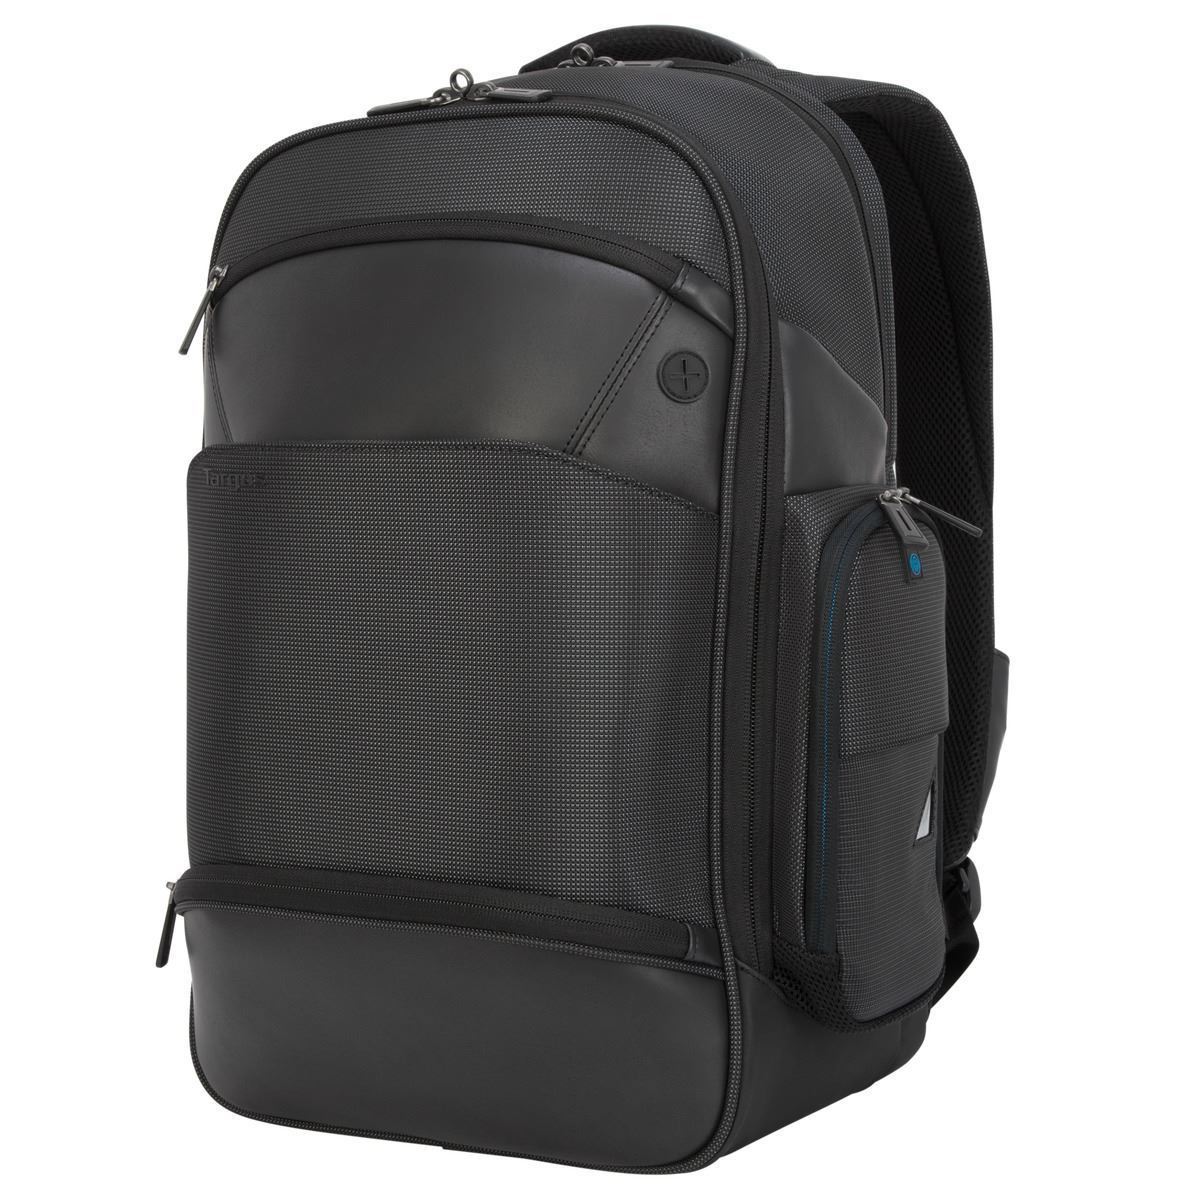 Introducir 91+ imagen portable charger backpack - Abzlocal.mx